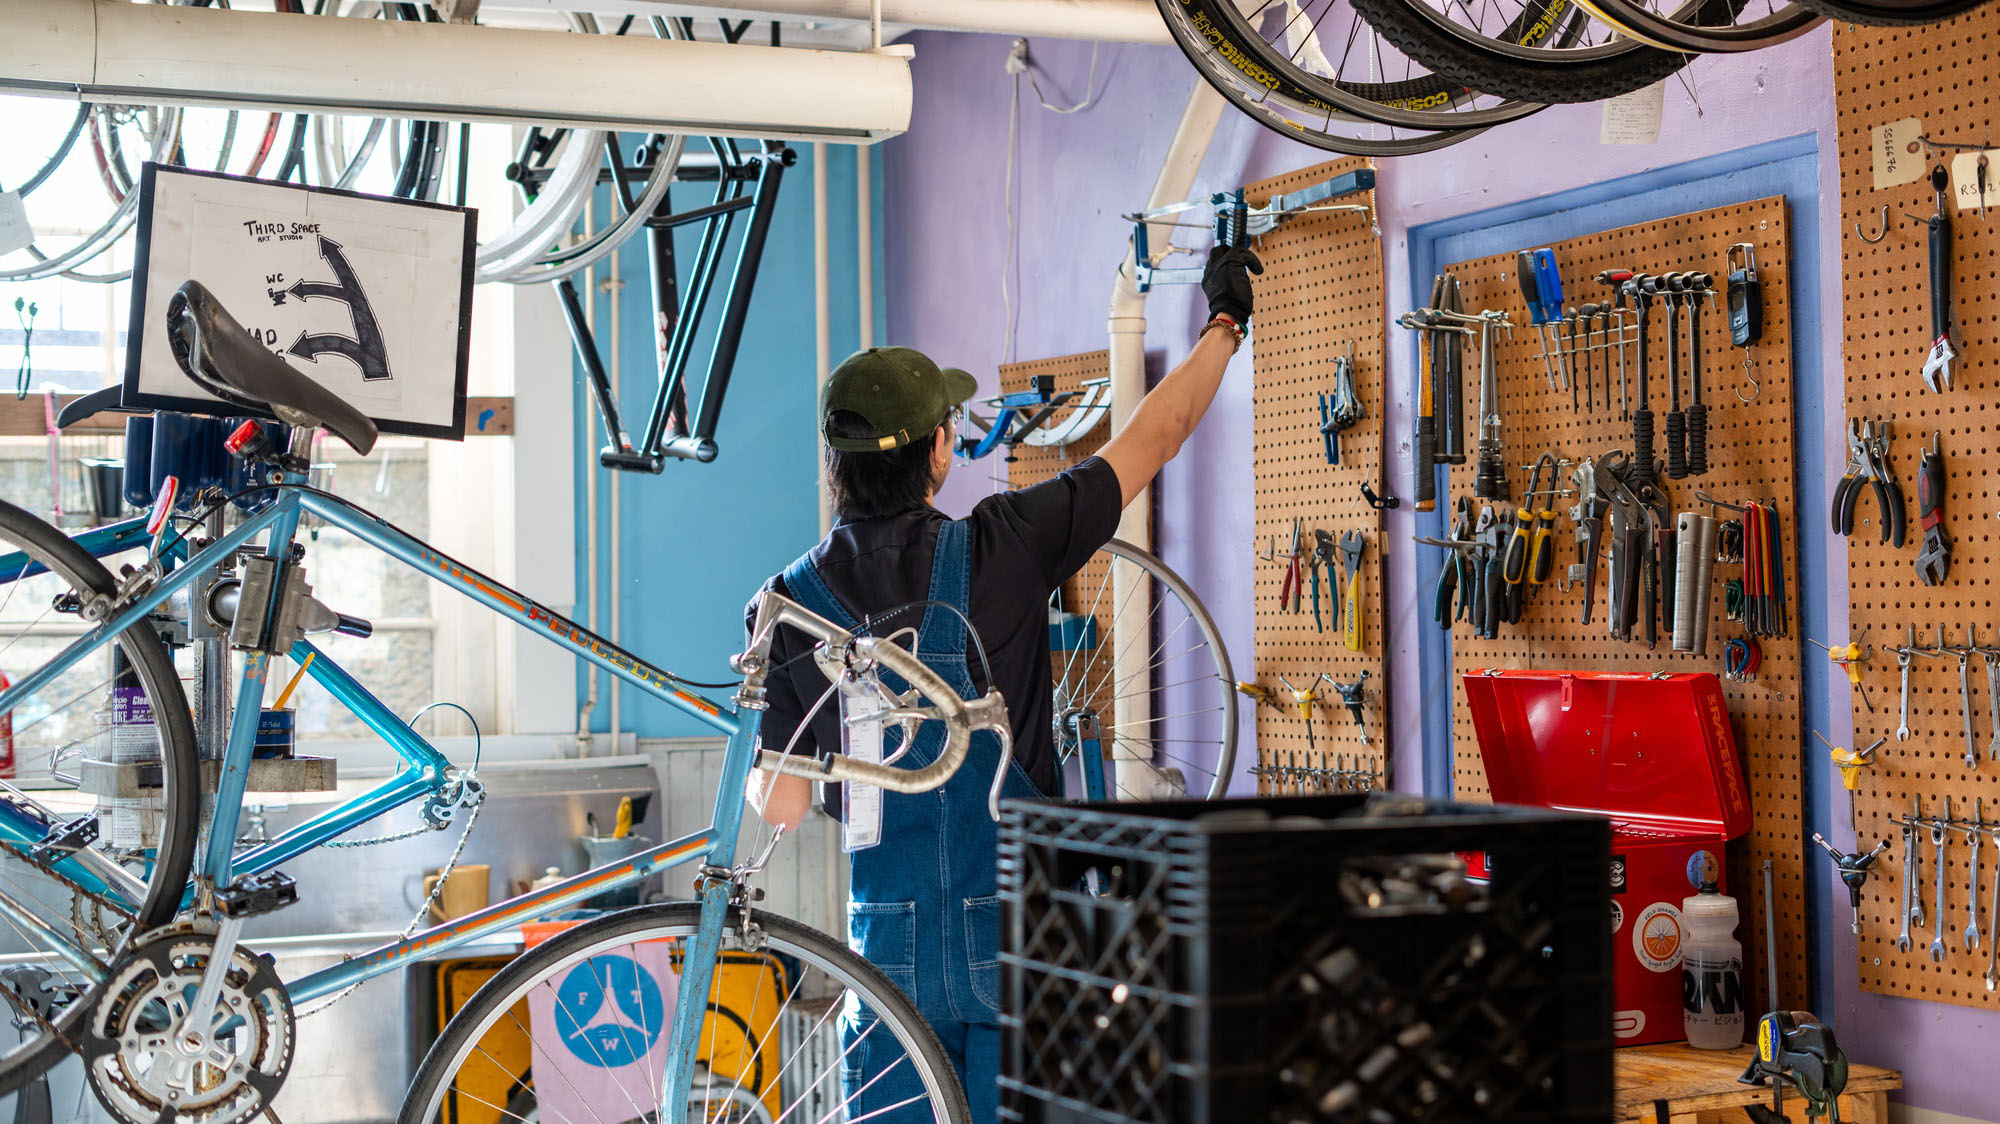 At his workstation, Julian K. Li ’25 prepares tools to adjust an off-center bike wheel. Li is one of the students who runs Quad Bikes, an undergraduate-run bicycle repair shop that reopened in the fall of 2022 following a two-year hiatus due to the Covid-19 pandemic.